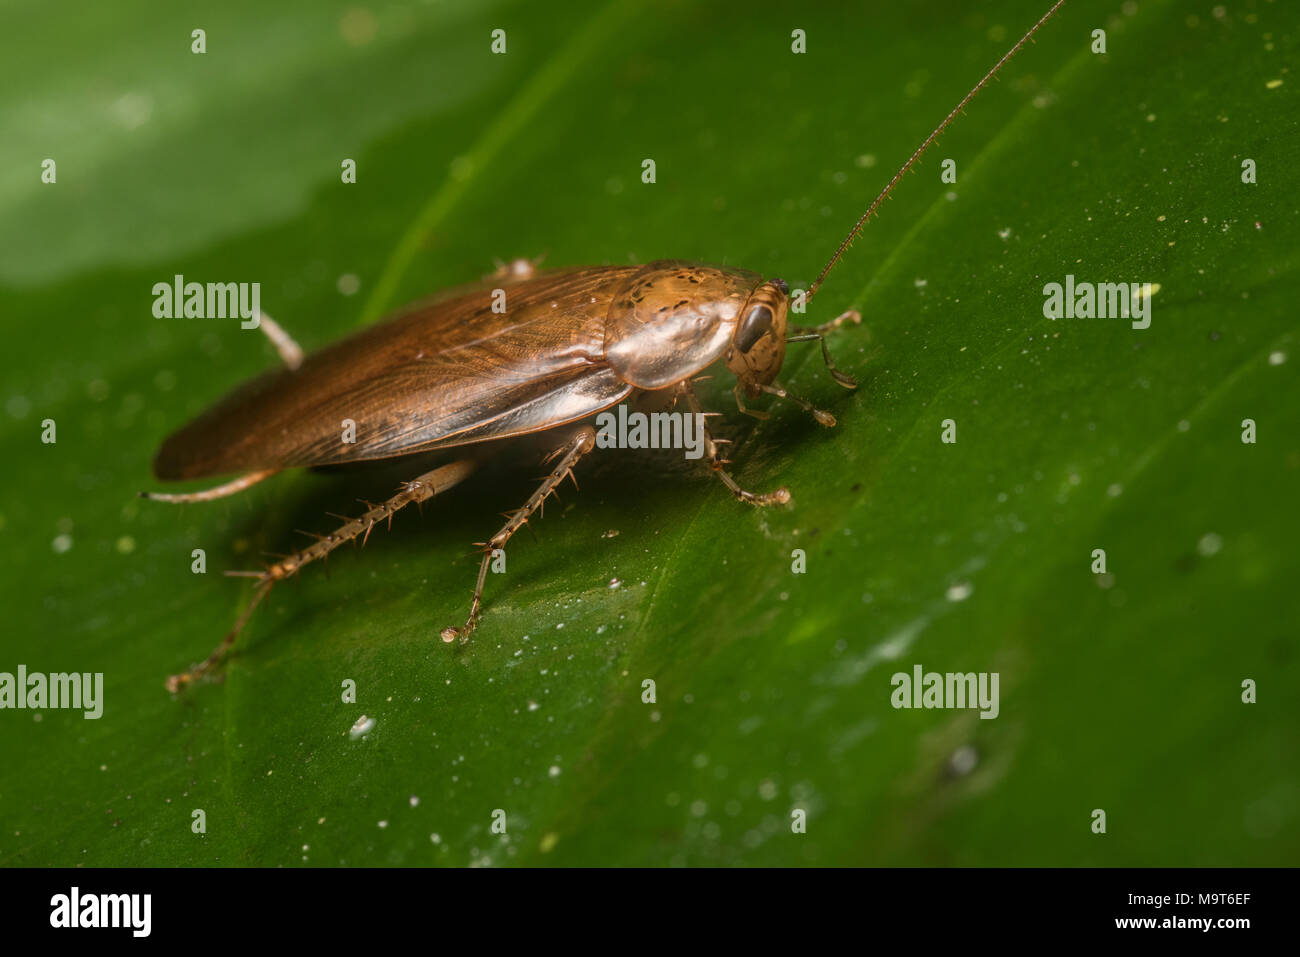 A roach from the Peruvian jungle. Stock Photo